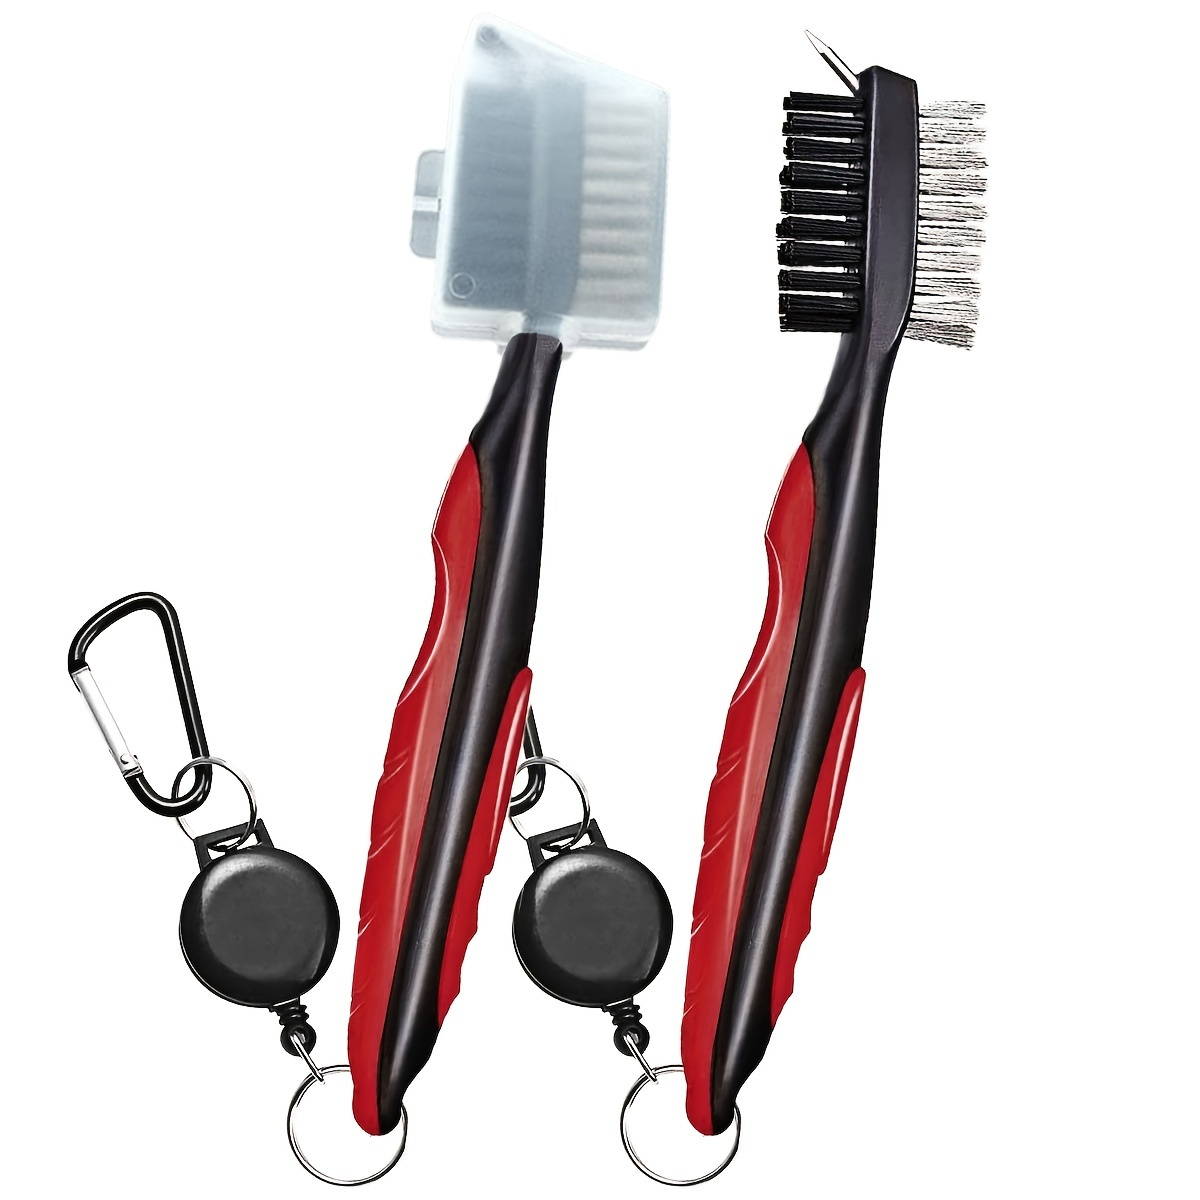 

Premium Golf Club Cleaning Brush With Protective Case And Convenient Carabiner Clip - Keep Your Clubs Clean And Improve Your Game